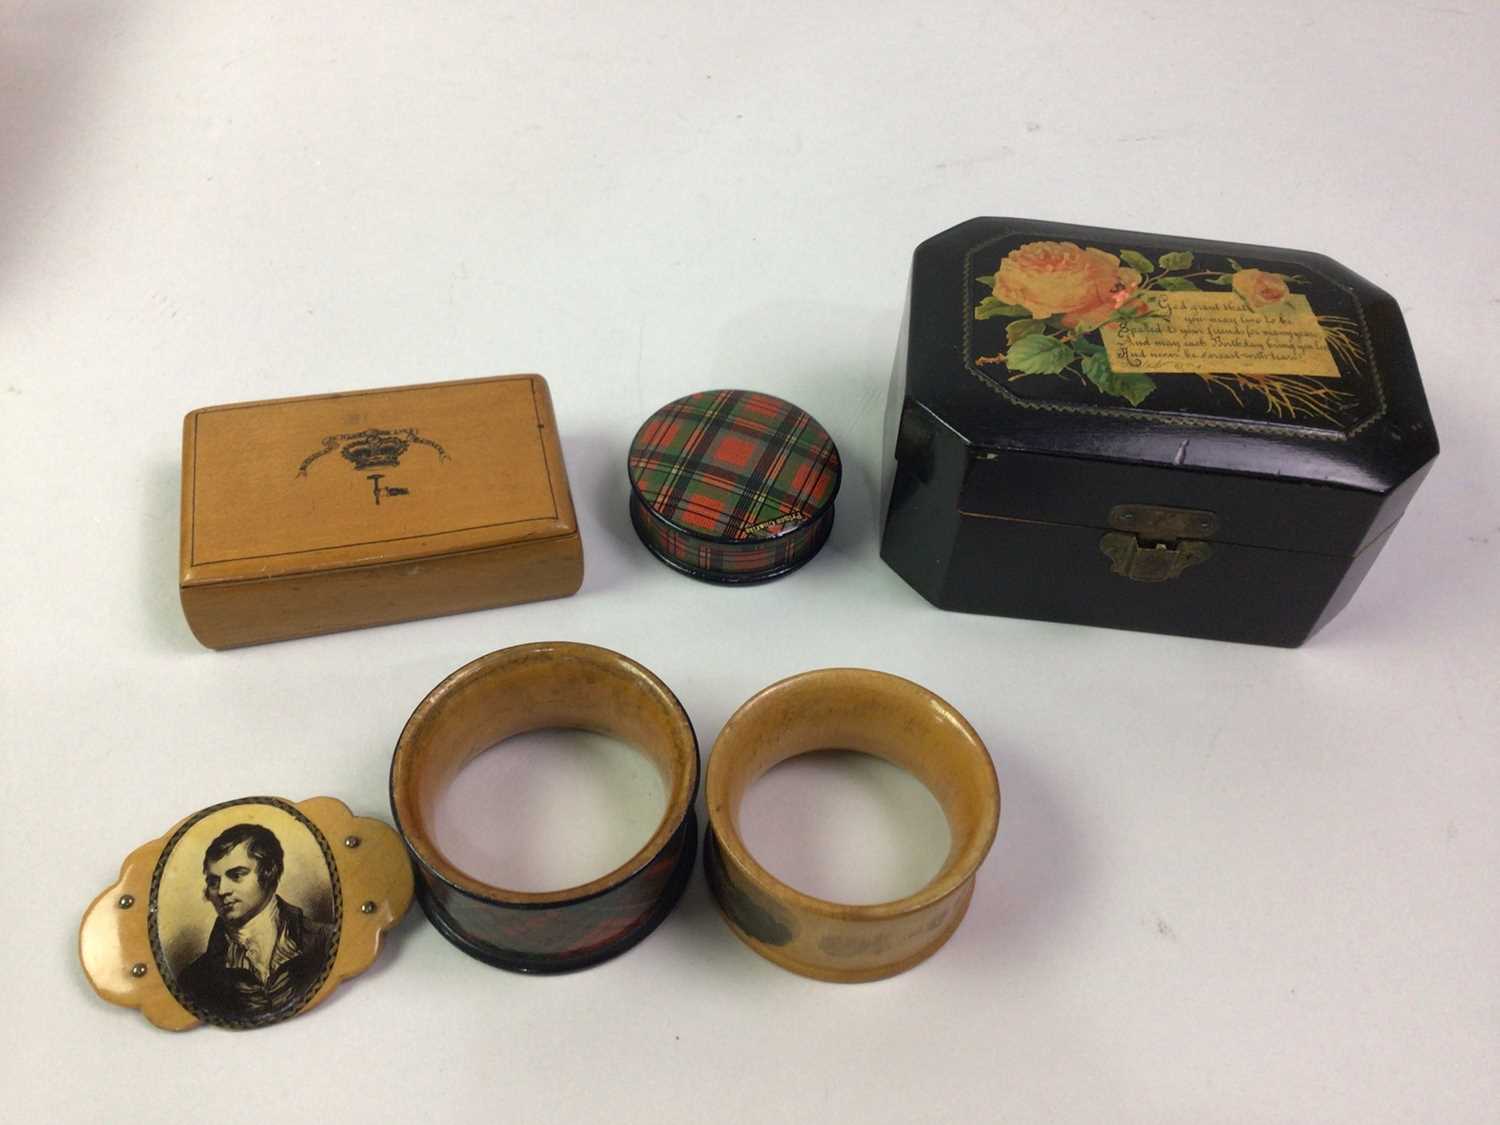 MAUCHLINE ROBERT BURNS BROOCH, ALONG WITH MAUCHLINE BOXES AND NAPKIN RINGS - Image 2 of 15